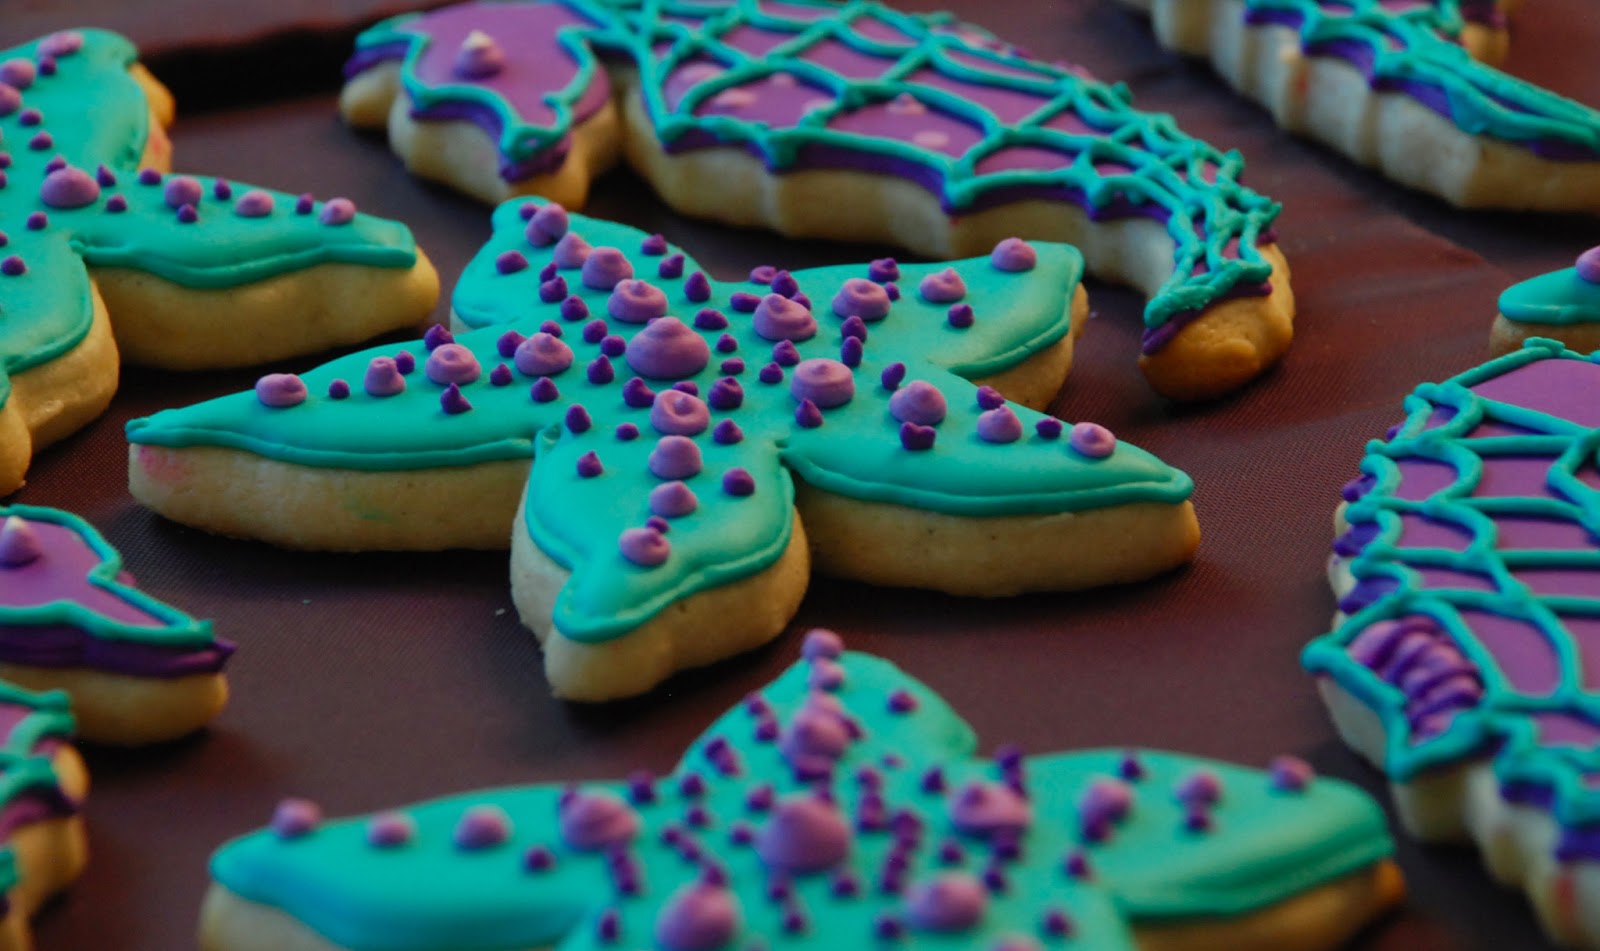 I Like to Bake: Under The Sea Cookies 2.0